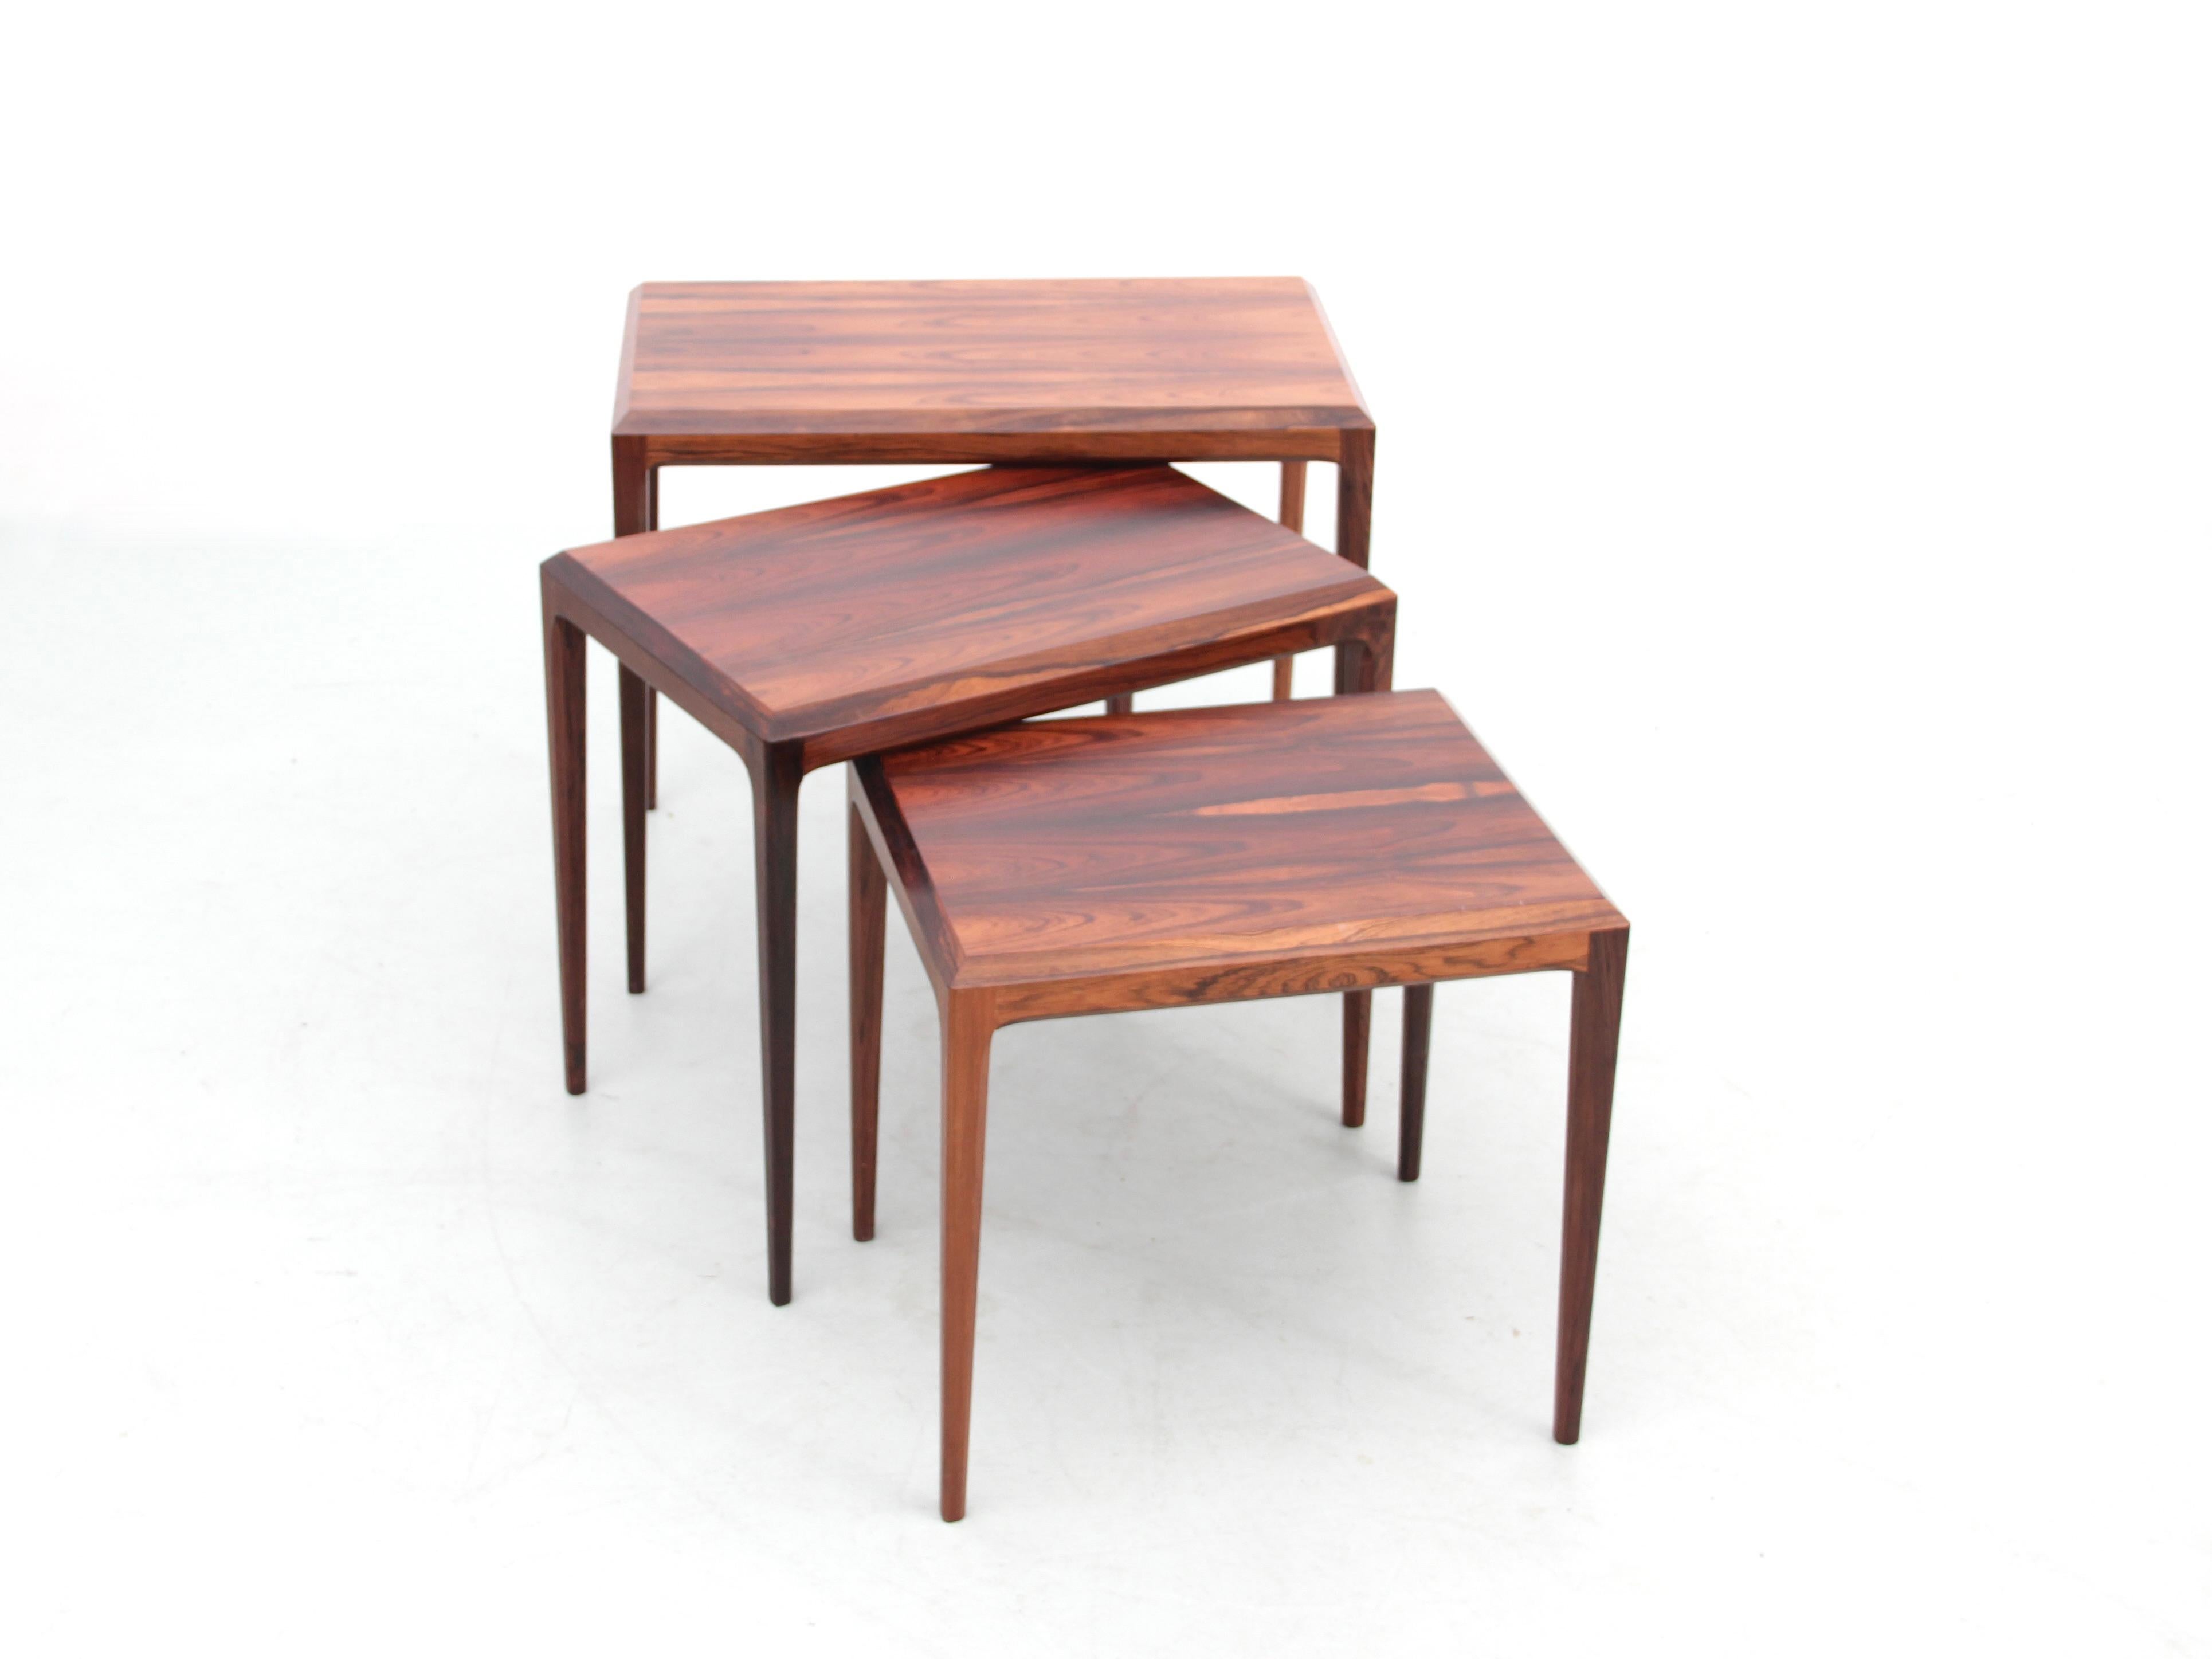 Danish Mid-Century Modern Scandinavian Nesting Tables in Rio Rosewood by Johannes Ander For Sale